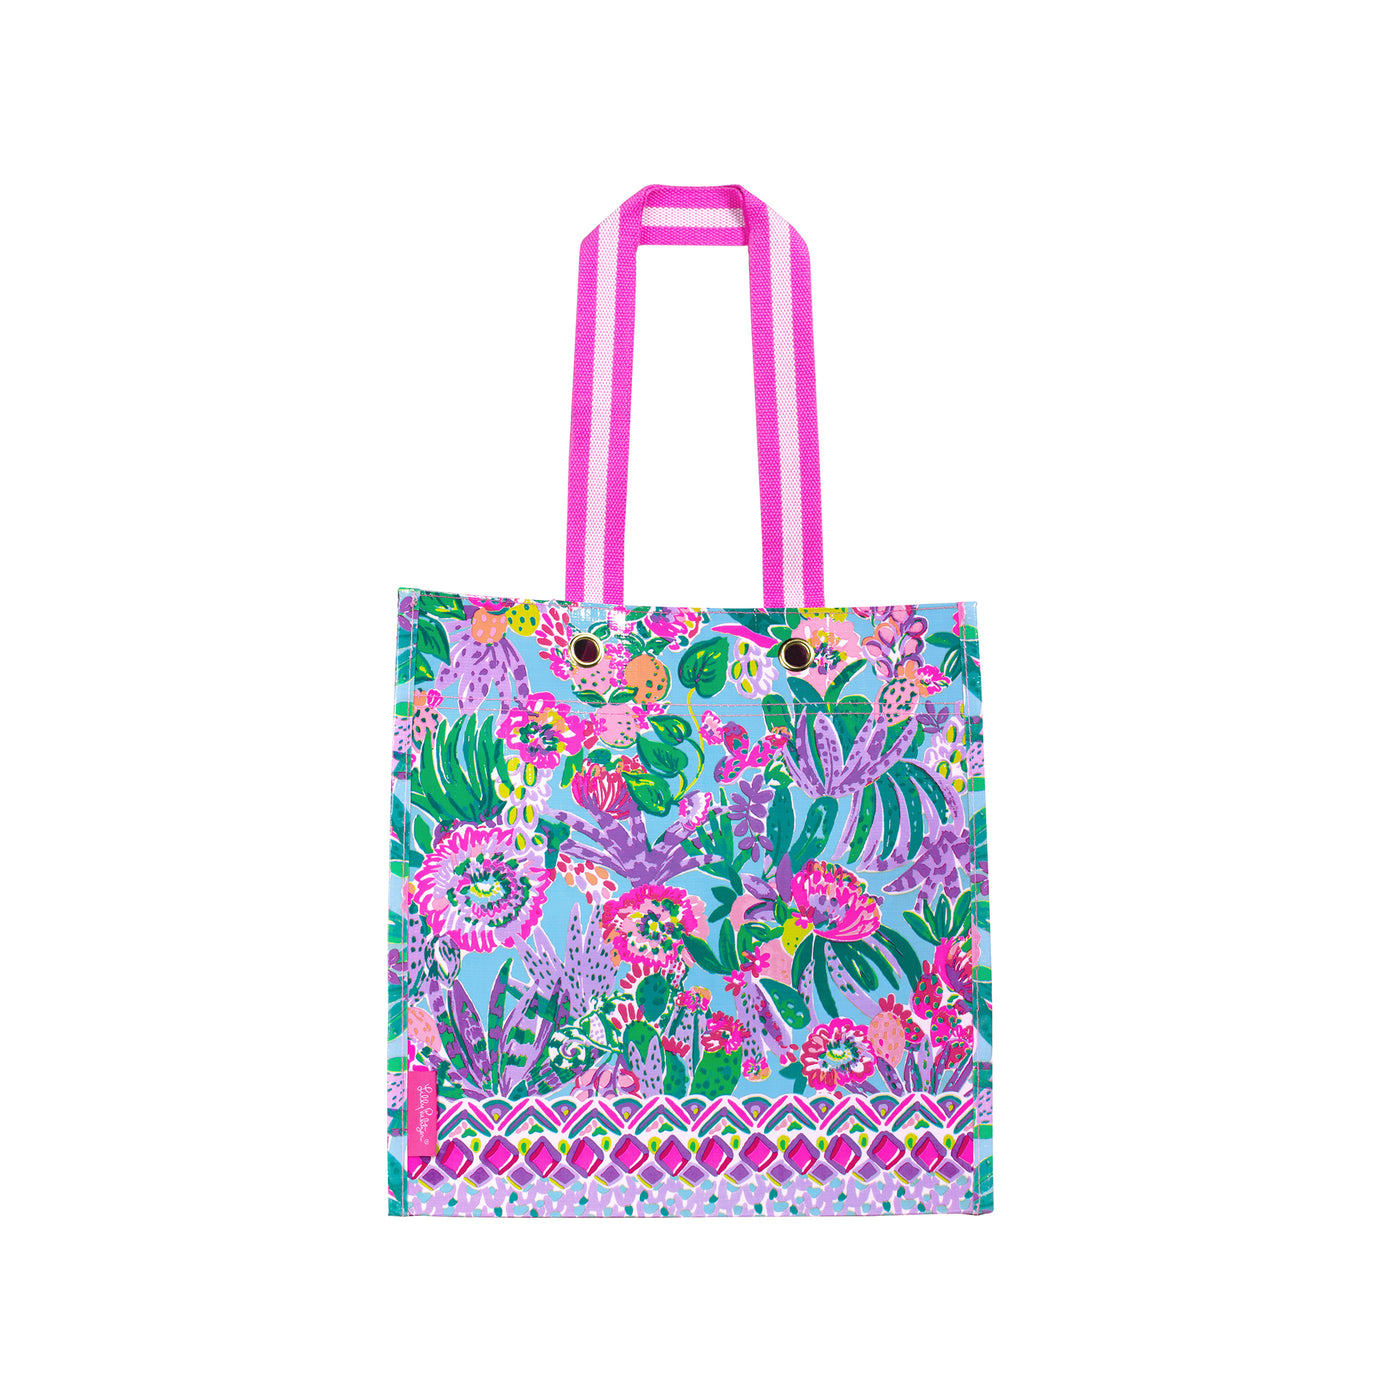 Lilly Pulitzer Market Tote, Me and My Zesty